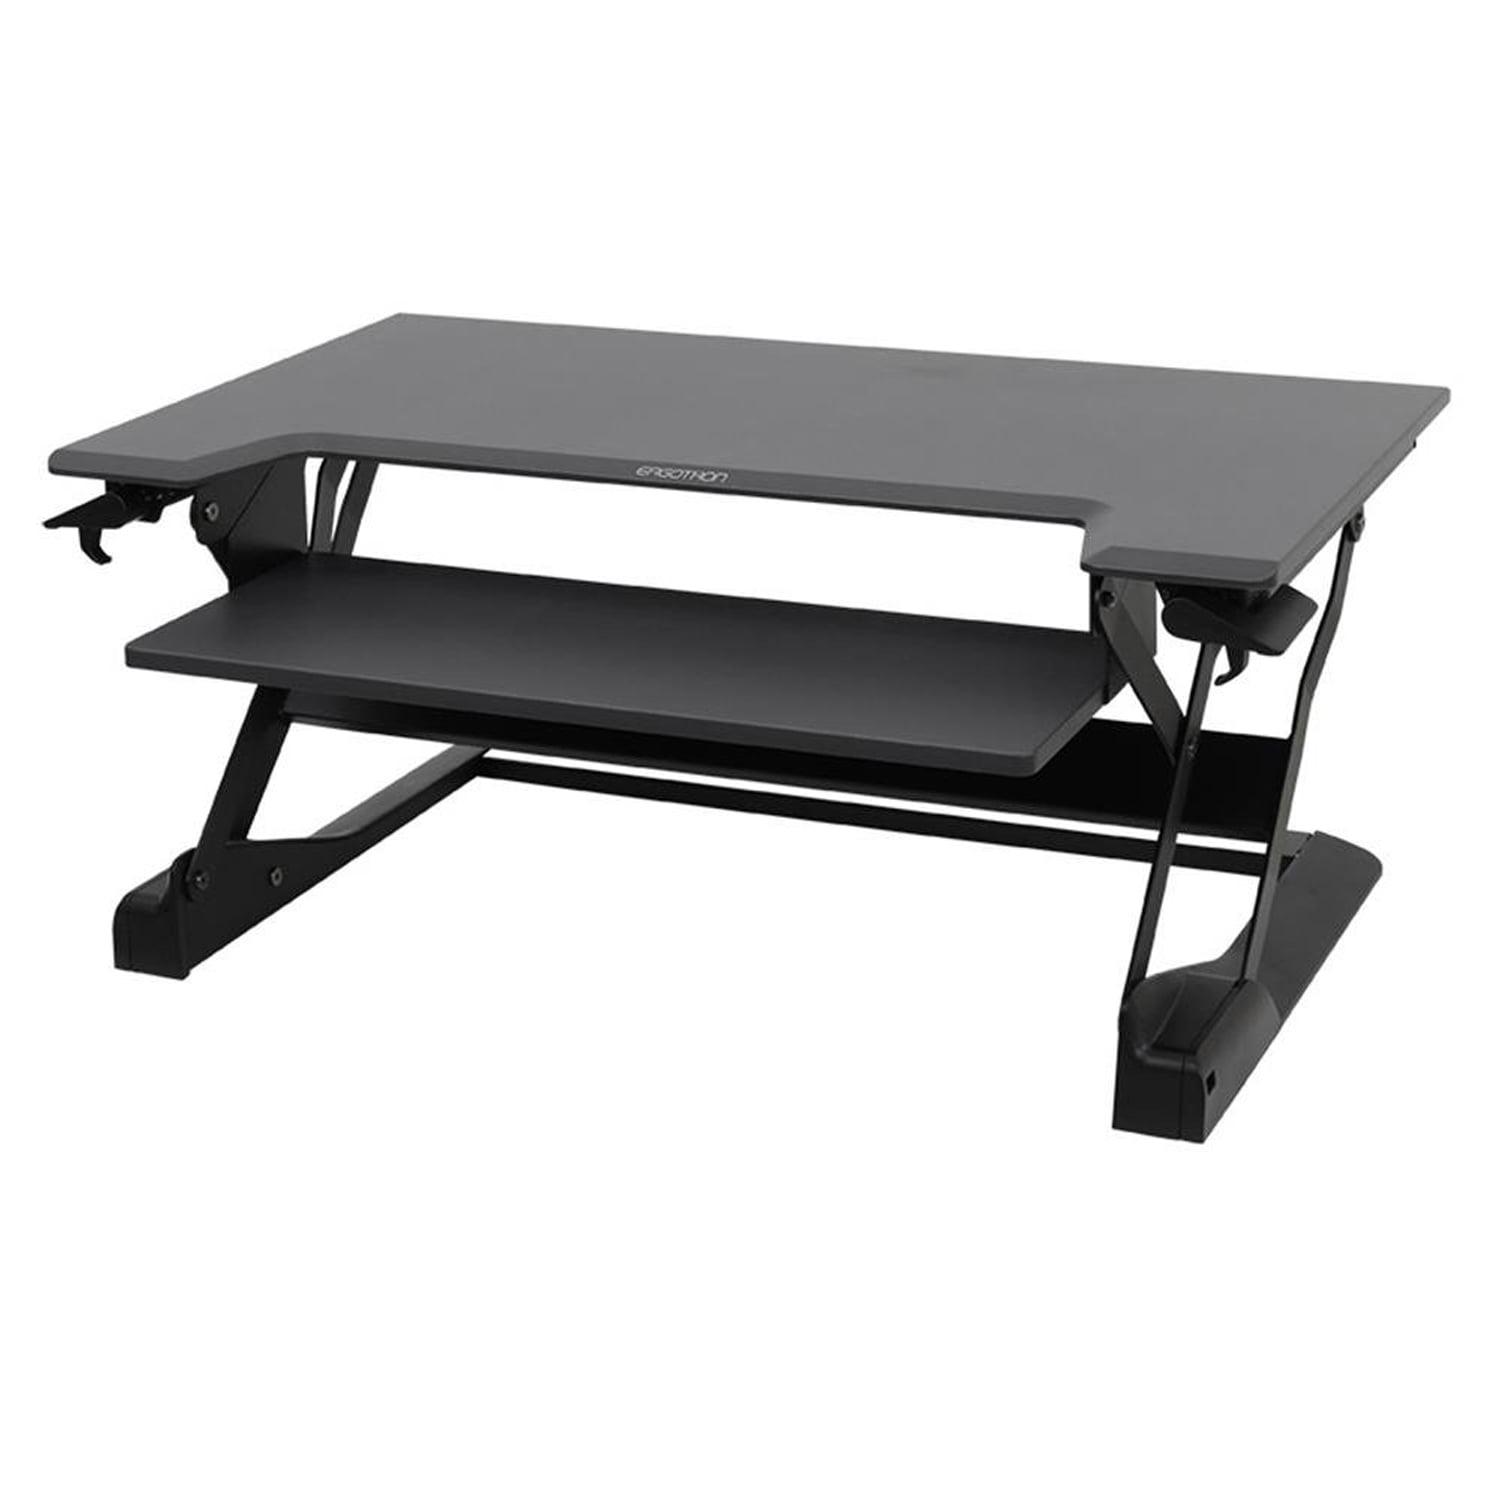 Sleek 37" Black Metal Sit-Stand Desk Converter with Pull-out Tray